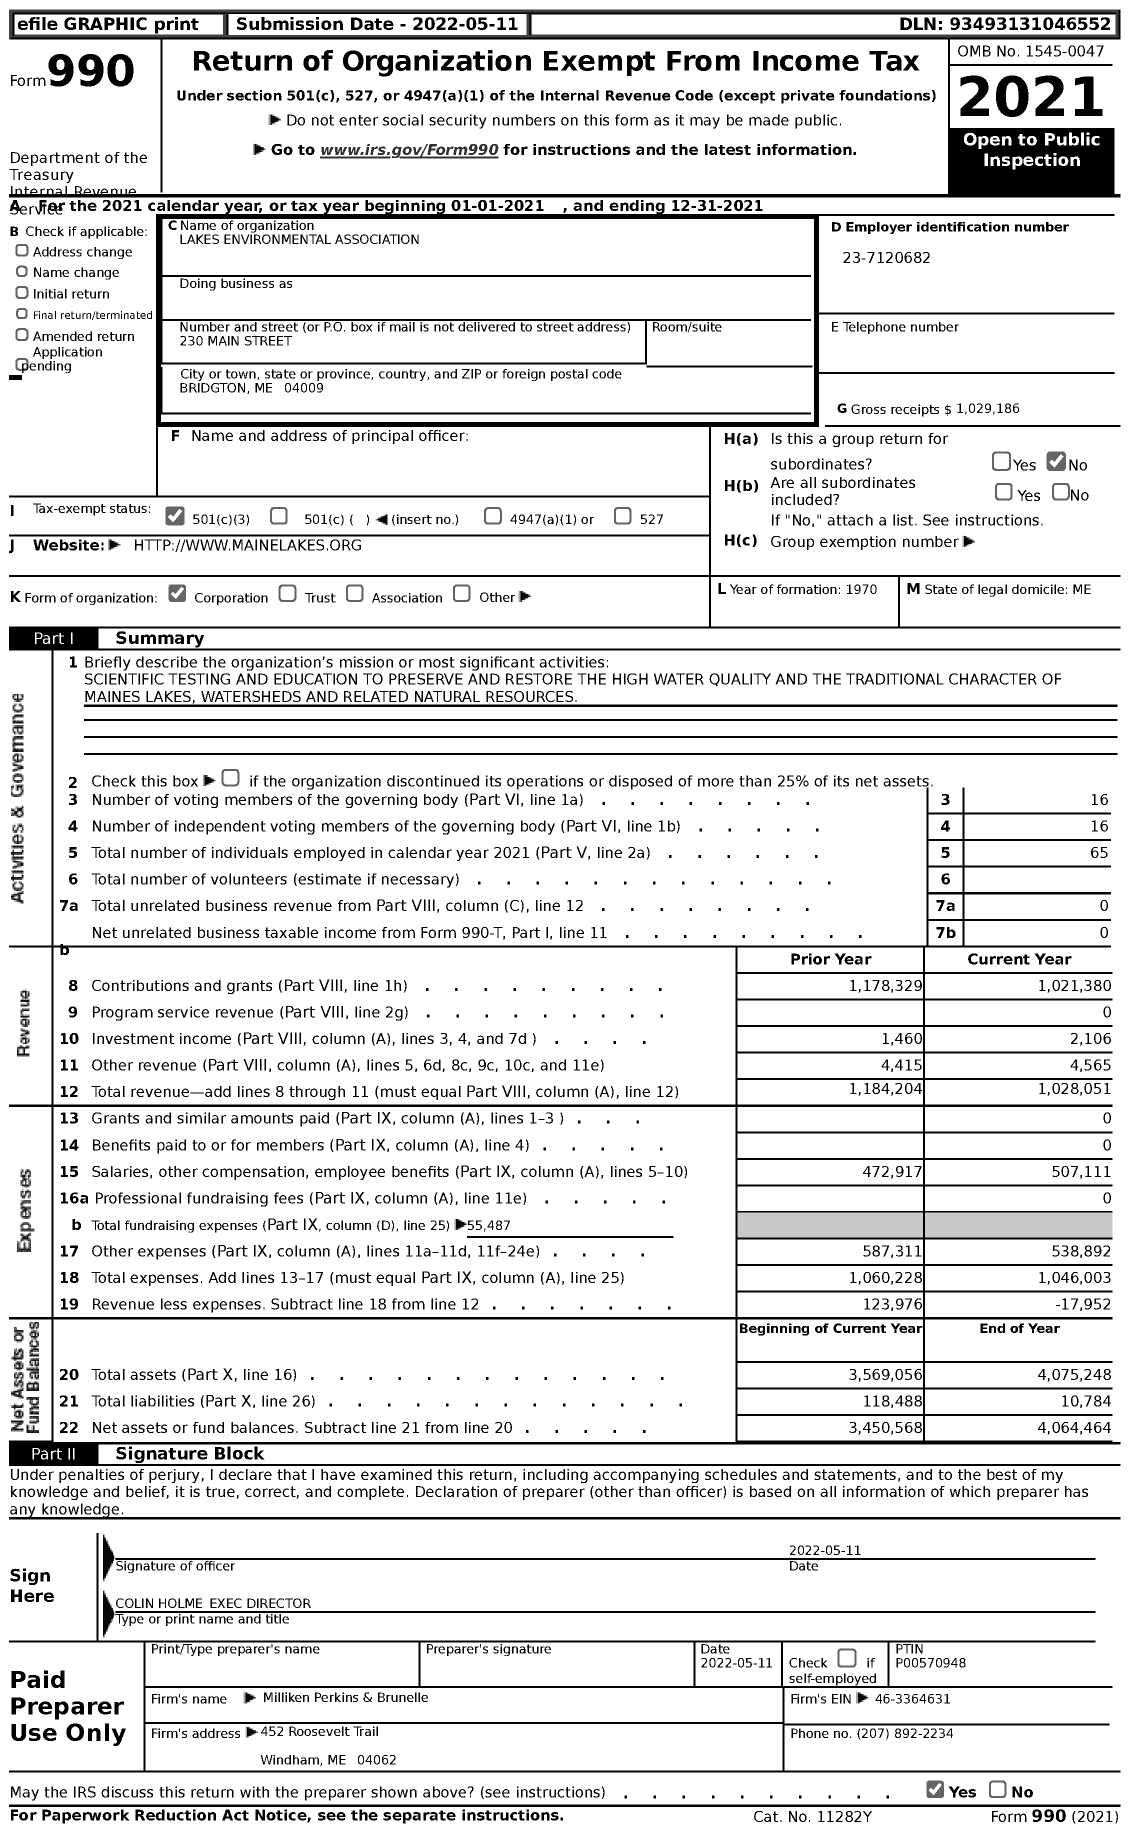 Image of first page of 2021 Form 990 for Lakes Environment Association (LEA)